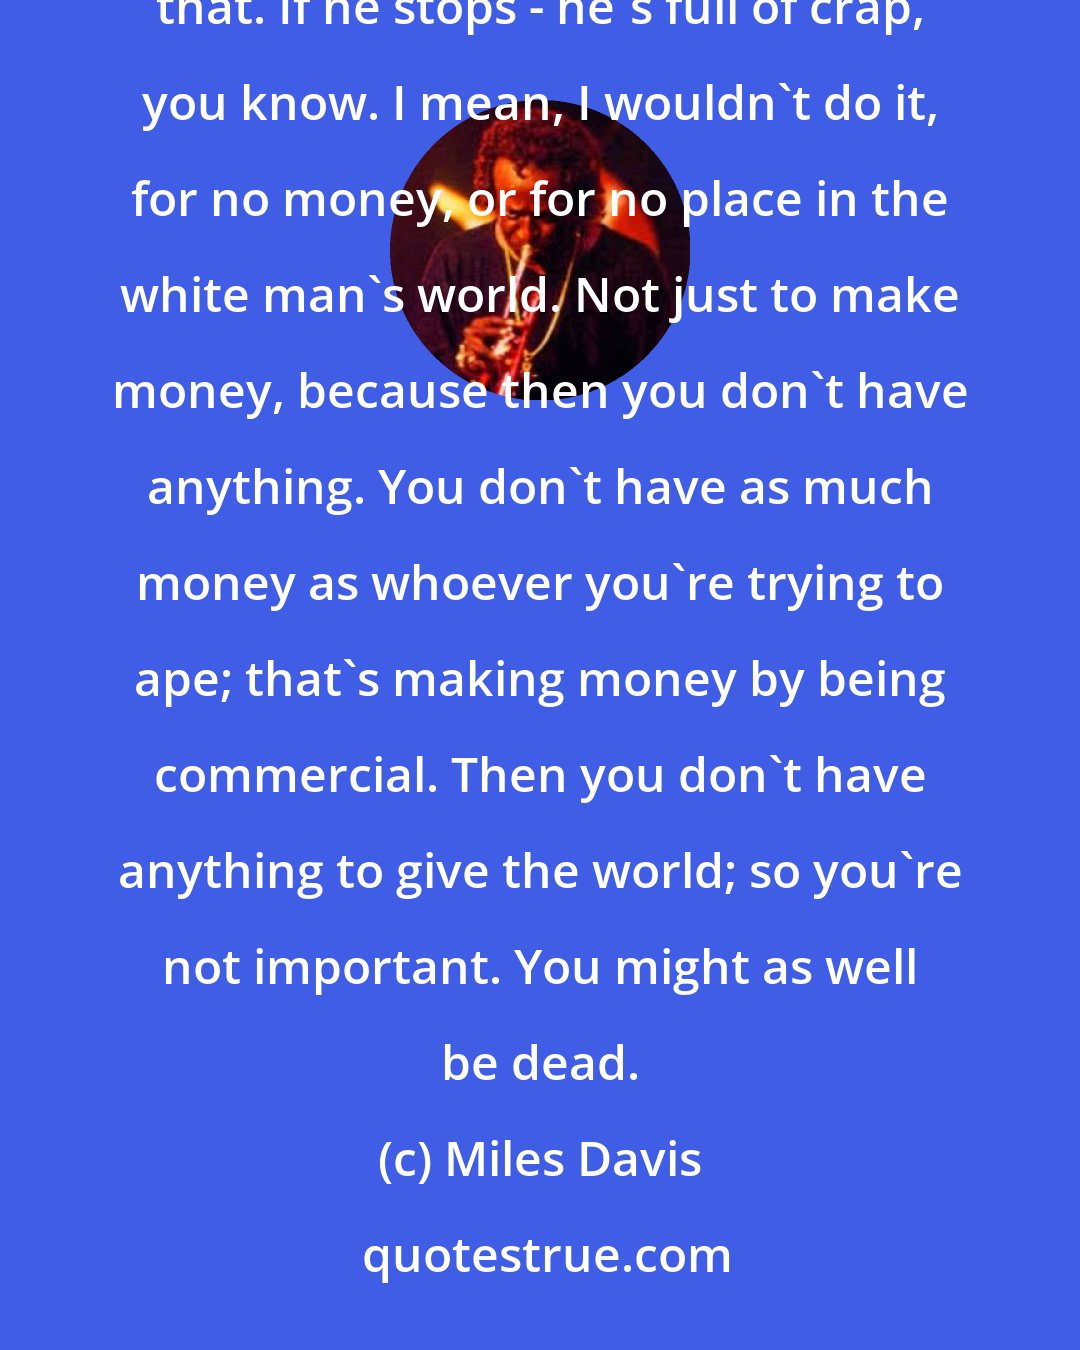 Miles Davis: I don't hold it against Dizzy [Gillespie], you know, but if a guy wants to play a certain way, you work towards that. If he stops - he's full of crap, you know. I mean, I wouldn't do it, for no money, or for no place in the white man's world. Not just to make money, because then you don't have anything. You don't have as much money as whoever you're trying to ape; that's making money by being commercial. Then you don't have anything to give the world; so you're not important. You might as well be dead.